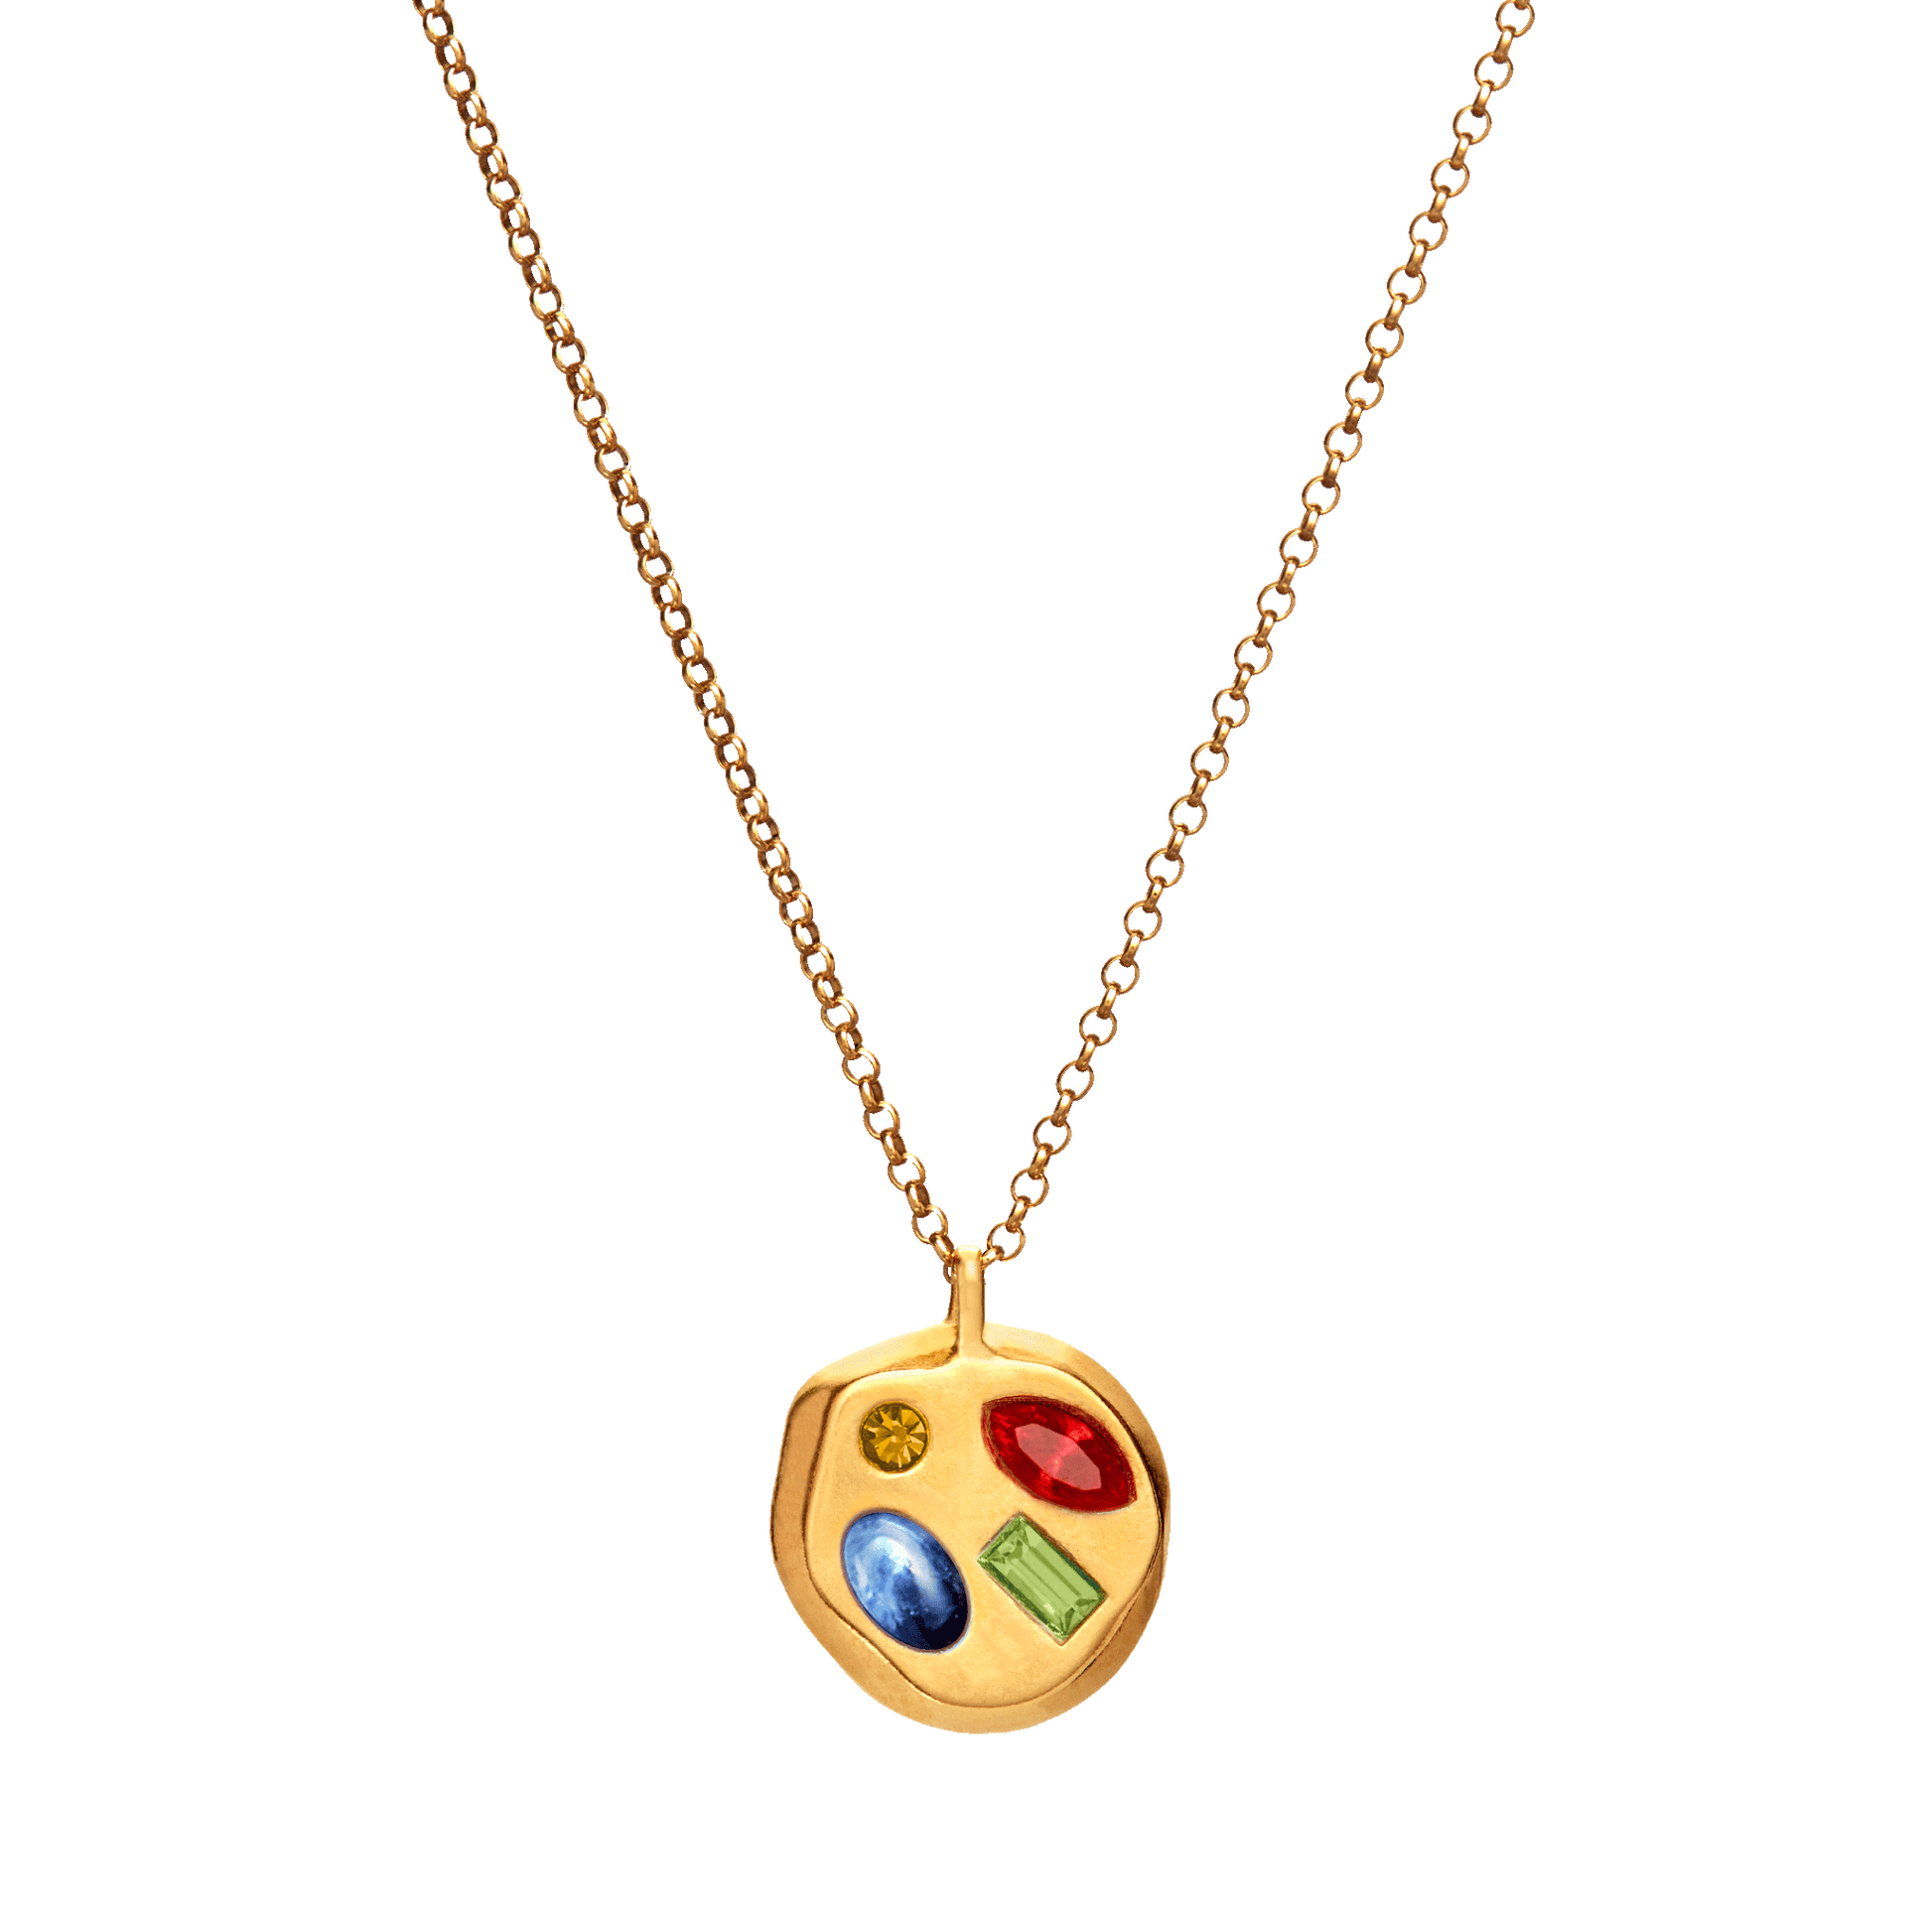 The July Eighth Pendant